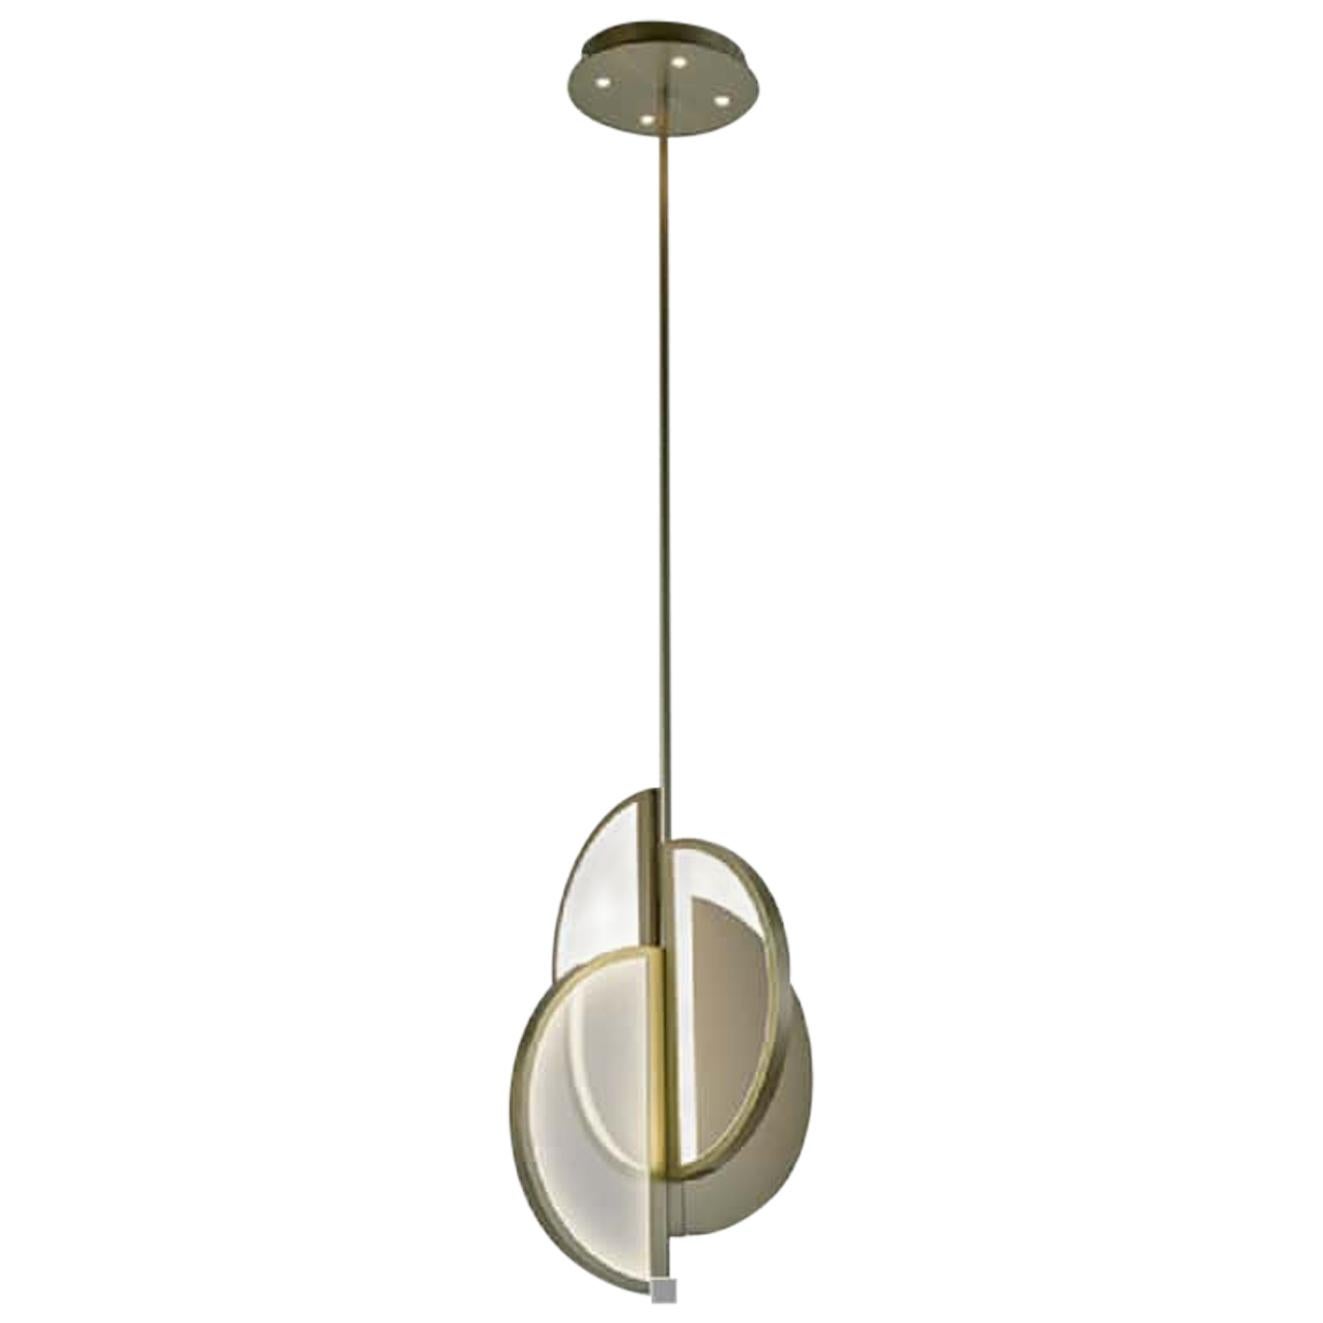 Beautiful Ceiling Lamp Brass Frame Champagne Finish O Brushed Nickel Fin